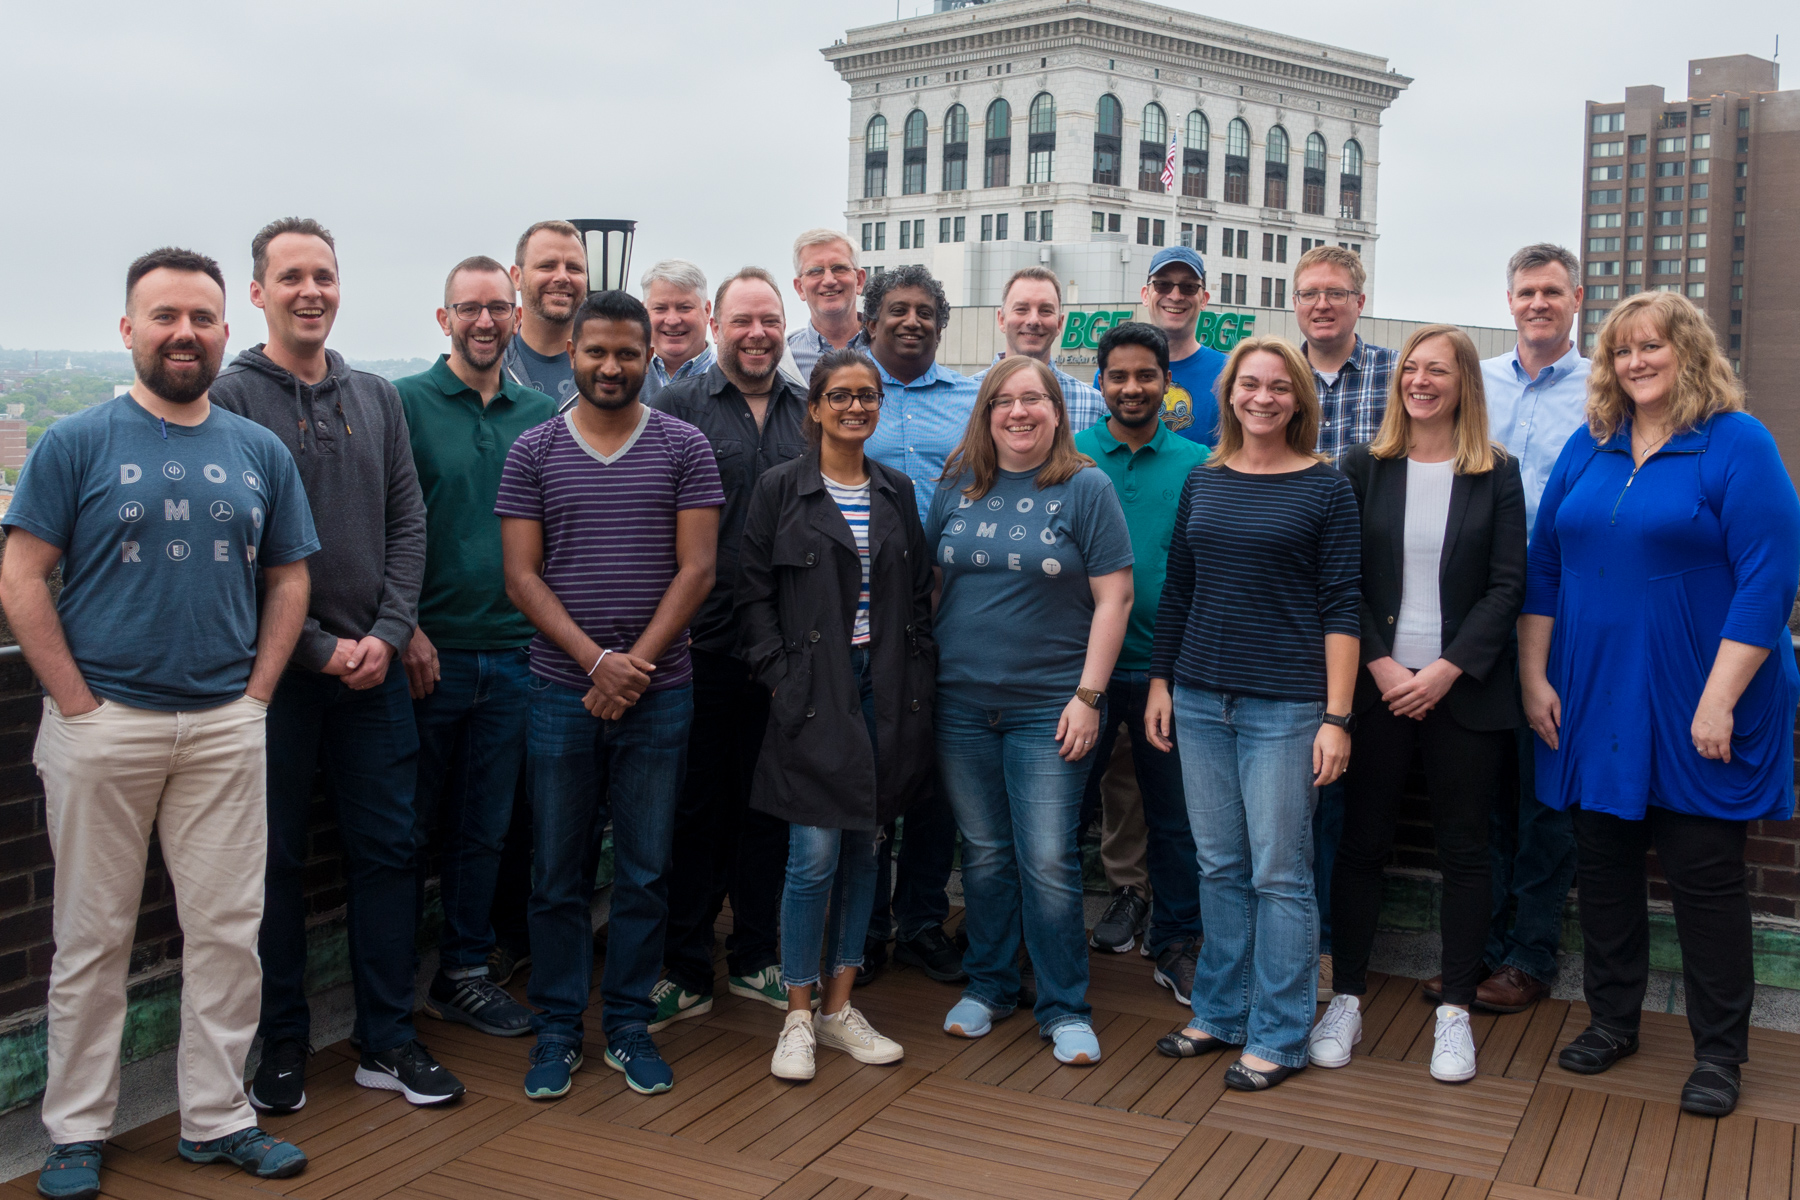 20 Typefi team members standing on a roof deck with other Baltimore buildings visible in the background.